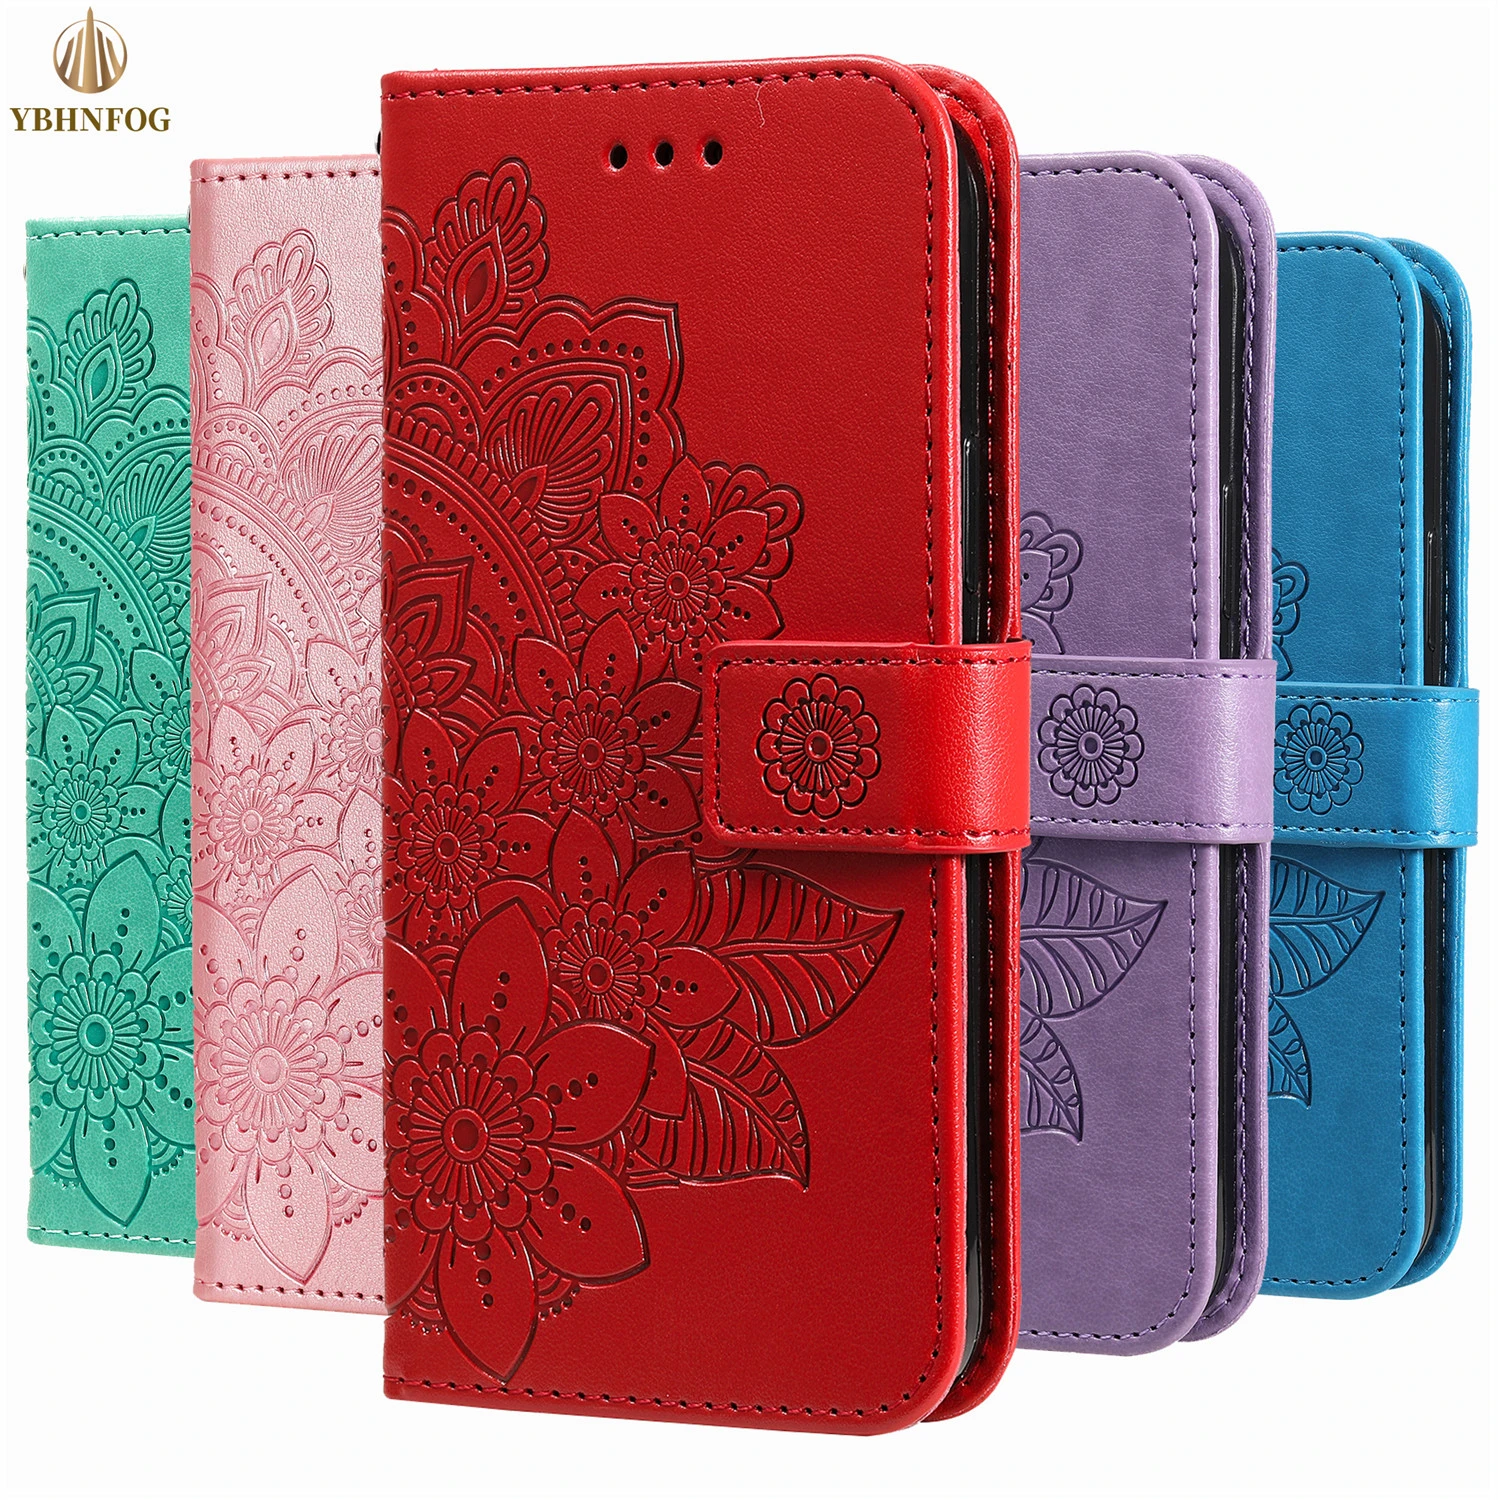 3D Flower Wallet Phone Case For iPhone 11 12 Pro Max 13 Mini XR X XS 7 8 Plus 6 6S SE 2020 Leather Holder Slots Flip Satnd Cover iphone 11 clear case